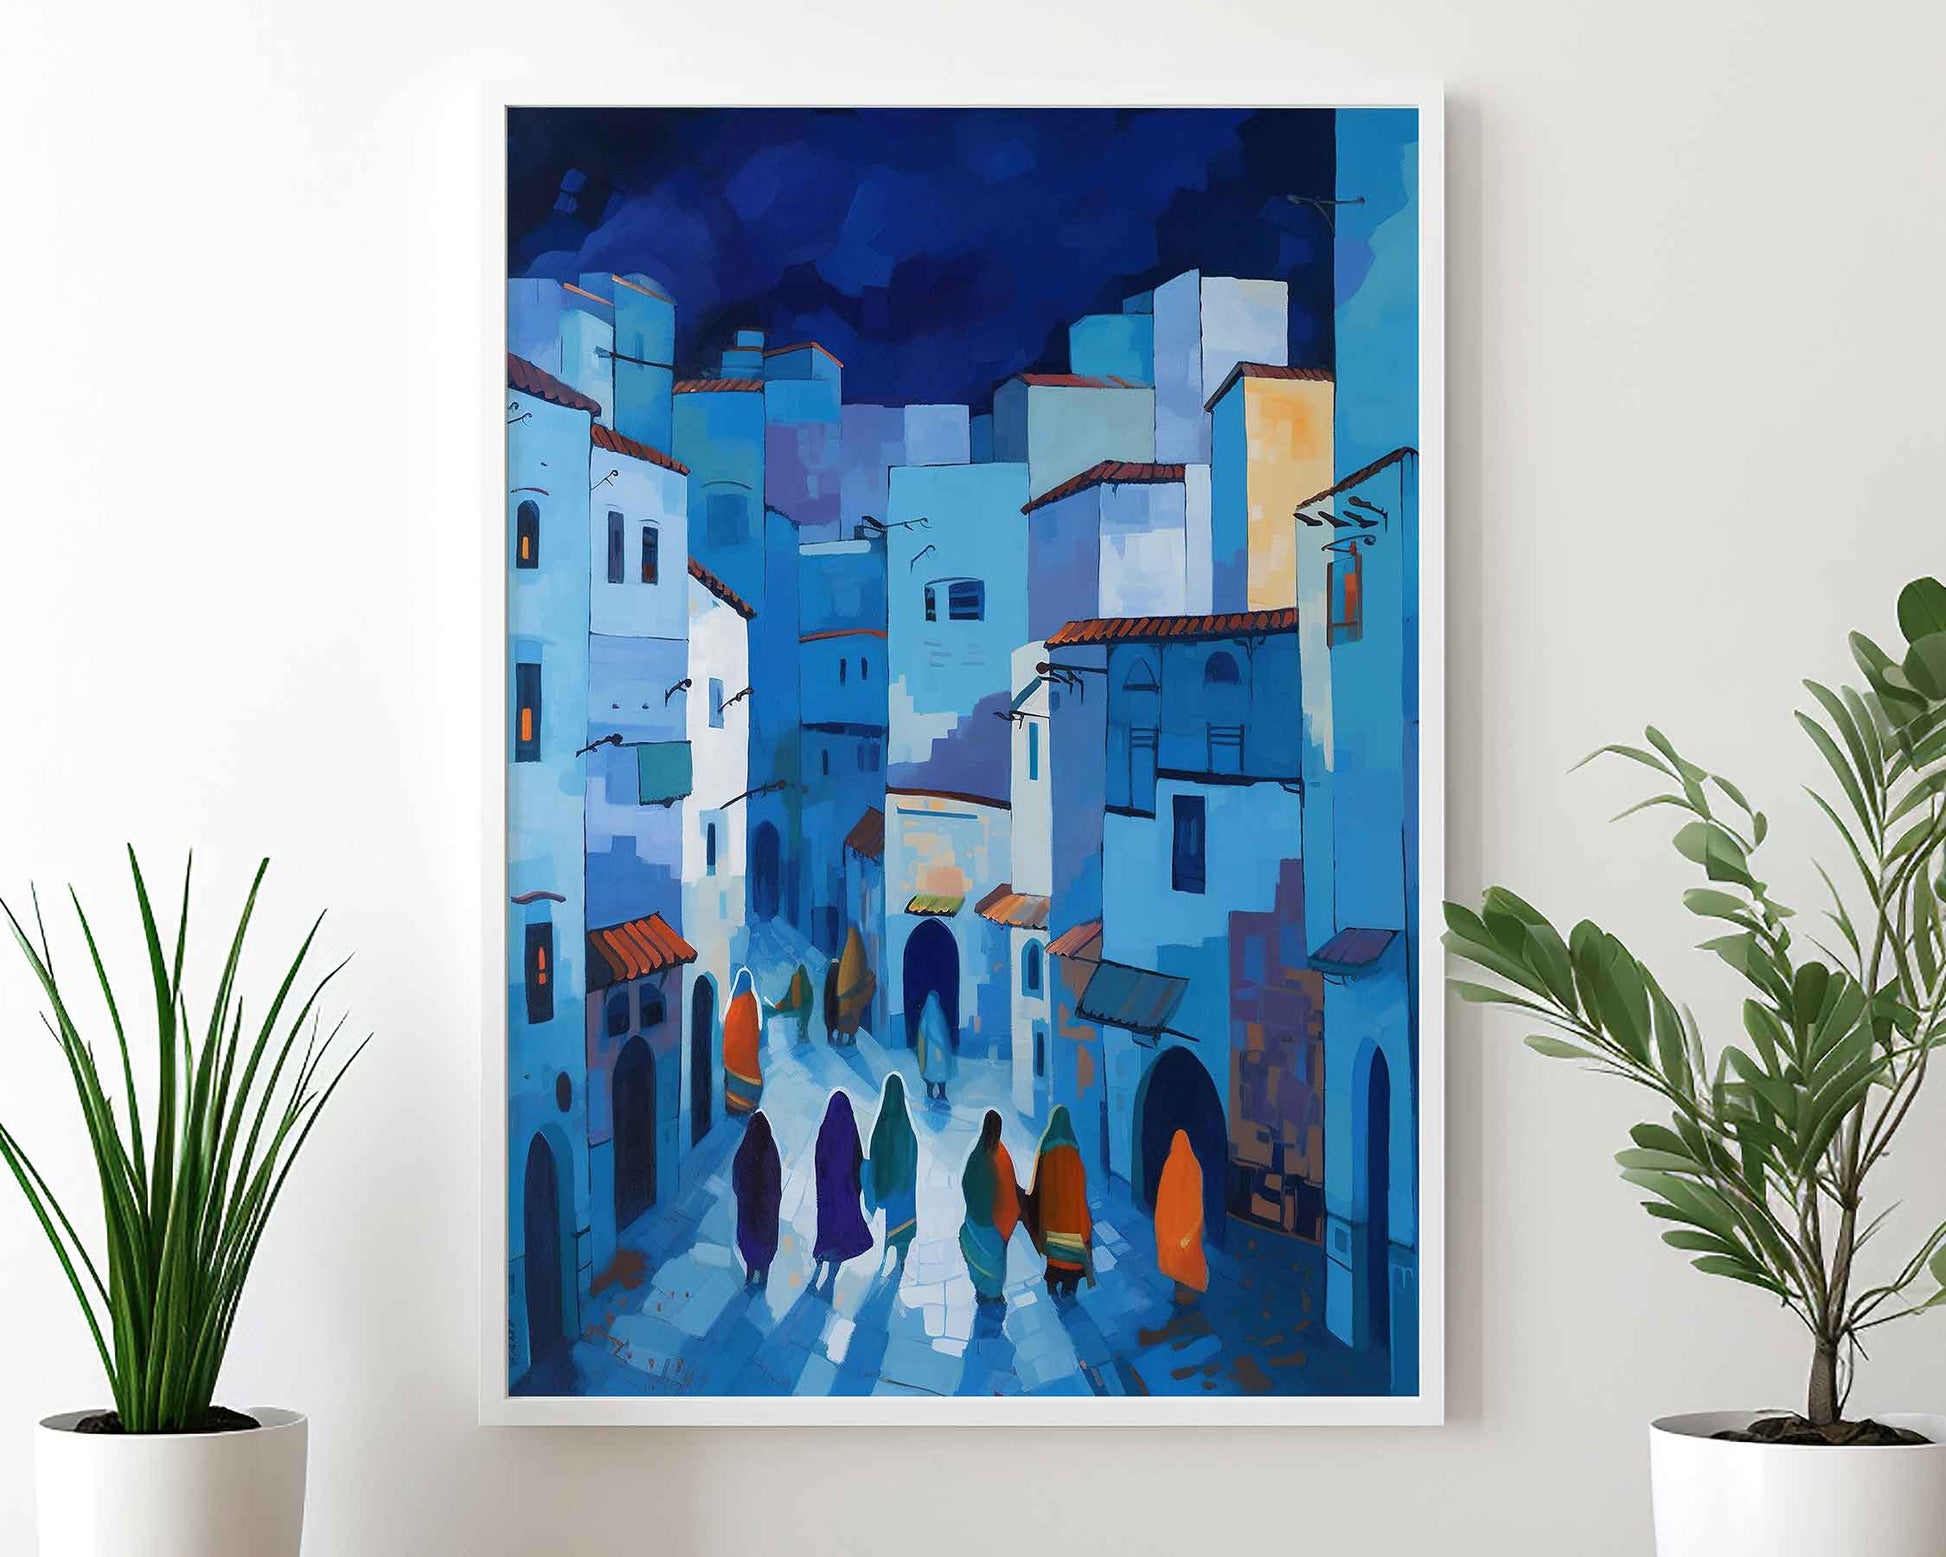 Framed Image of Chefchaouen Blue Streets of Morocco Colourful Abstract Wall Art Prints